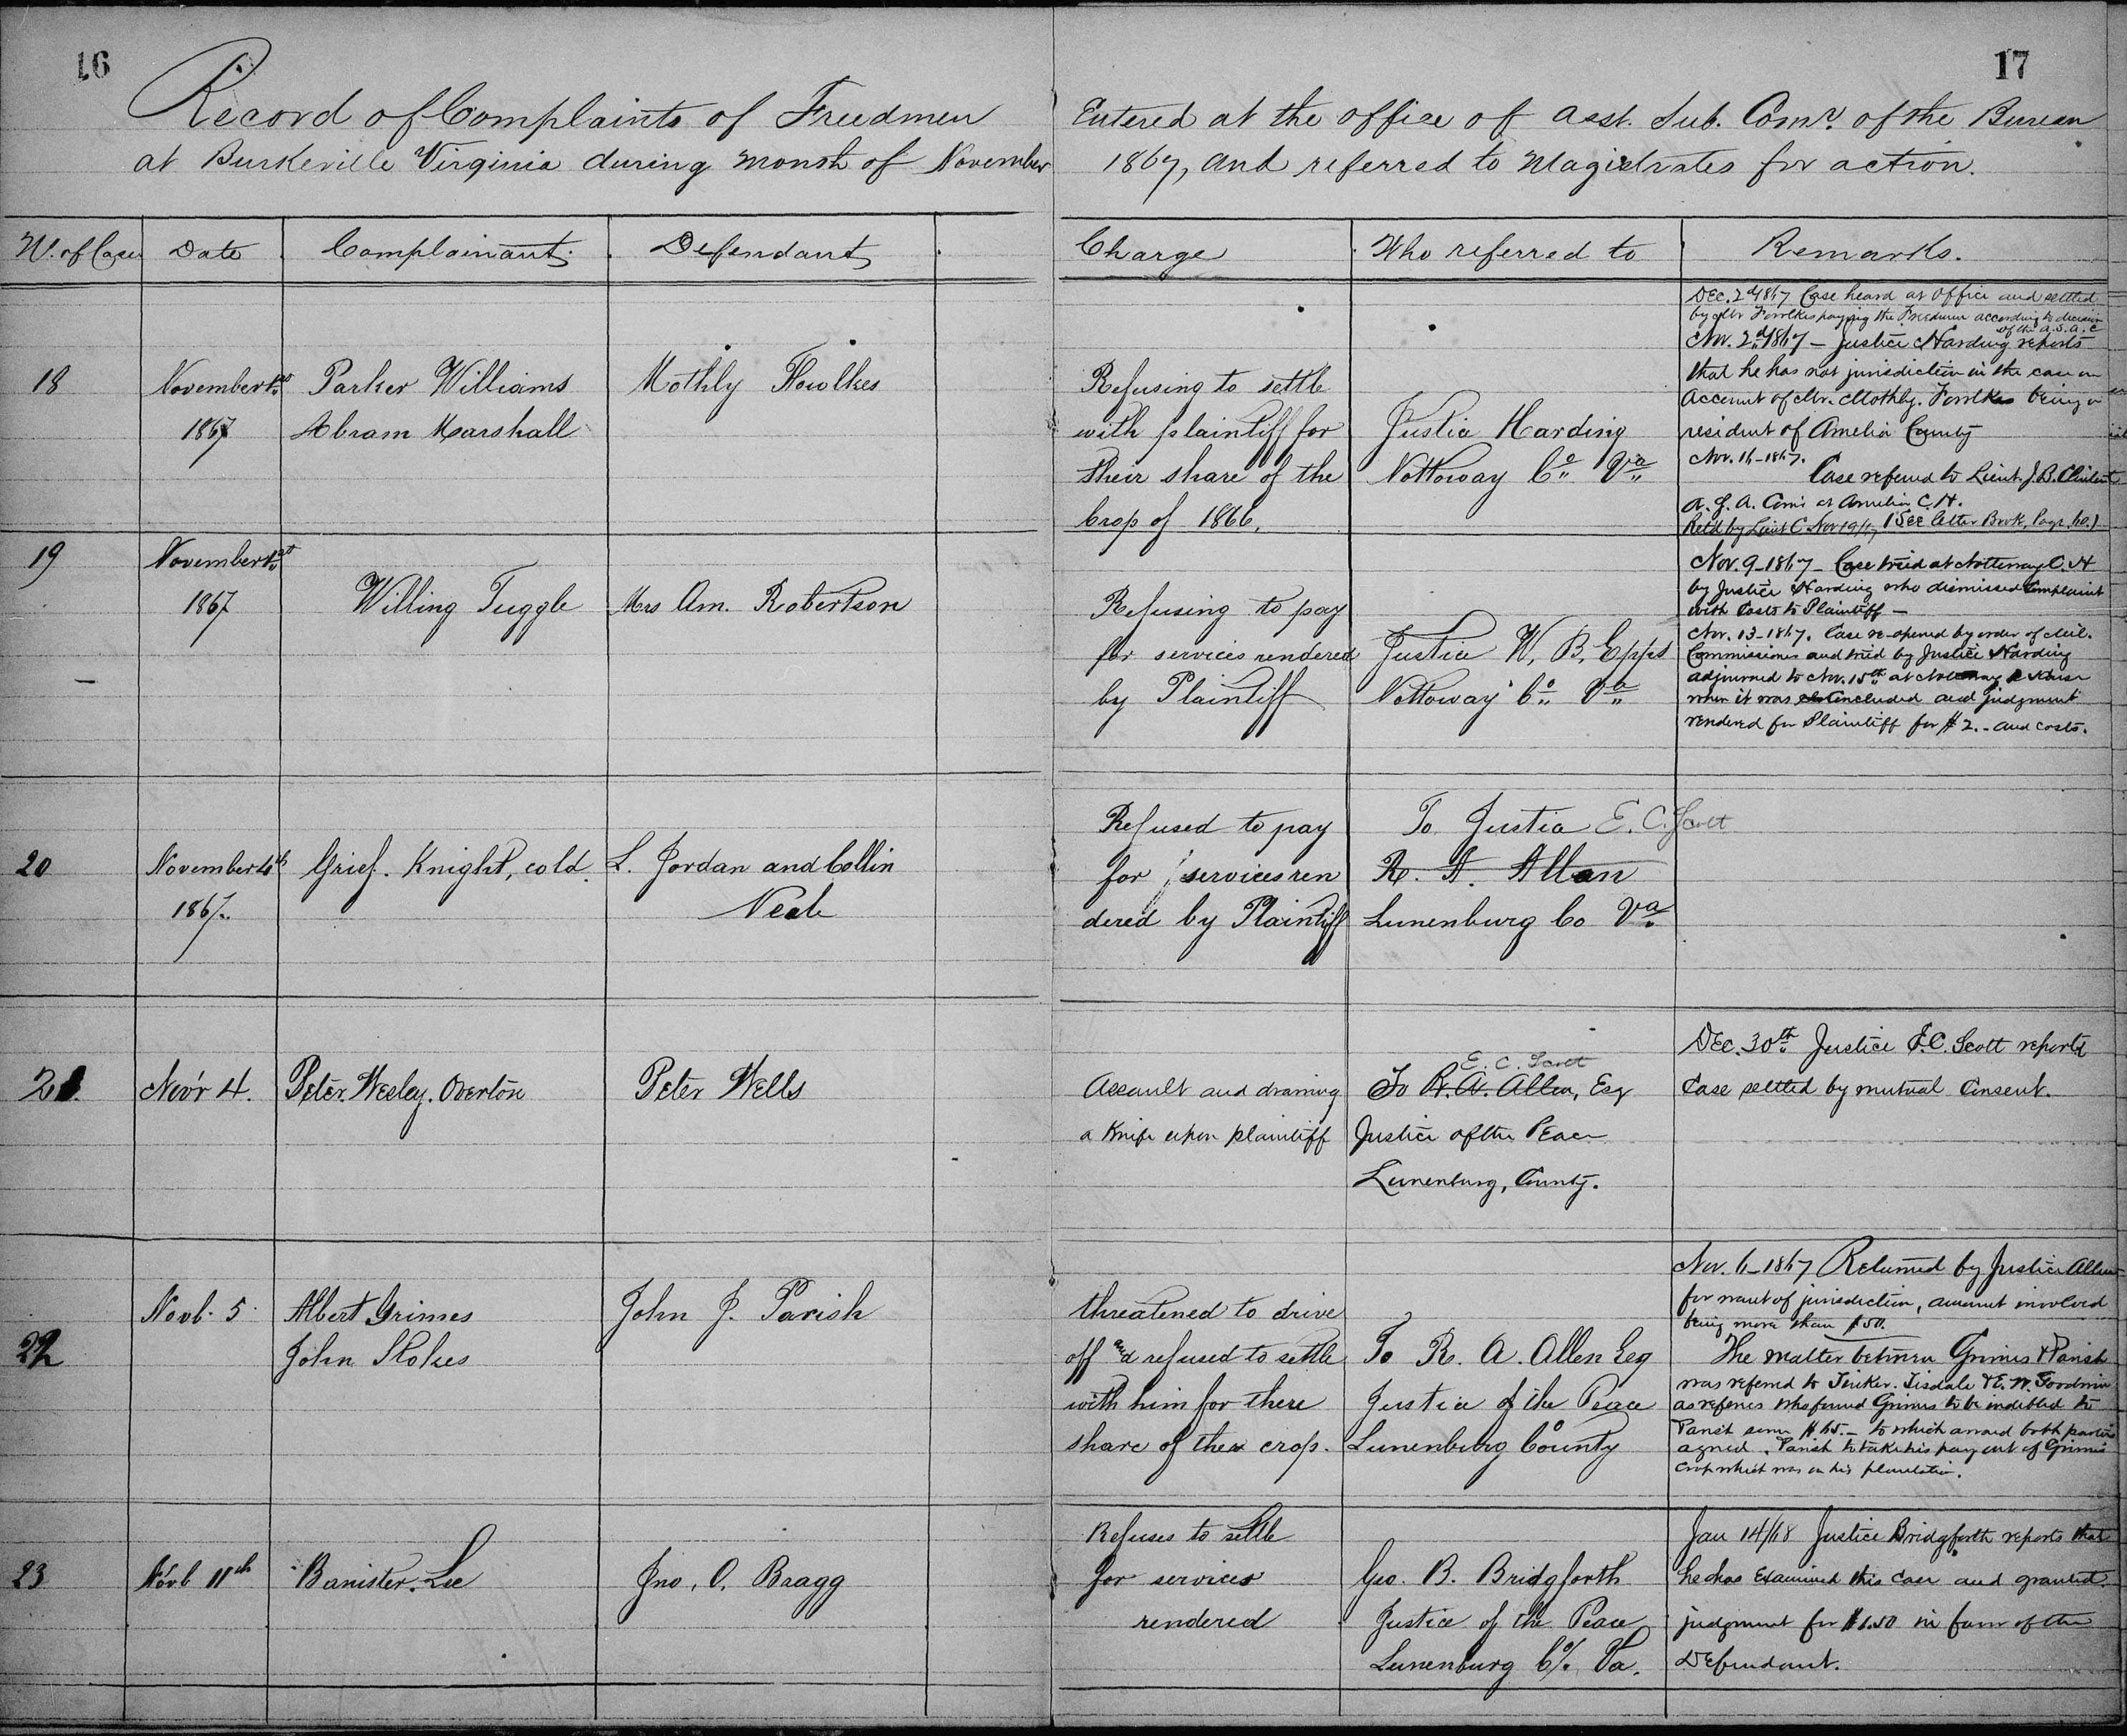 A two page records, handwritten, of freedmen’s complaints in a chart with different columns of information gathered.